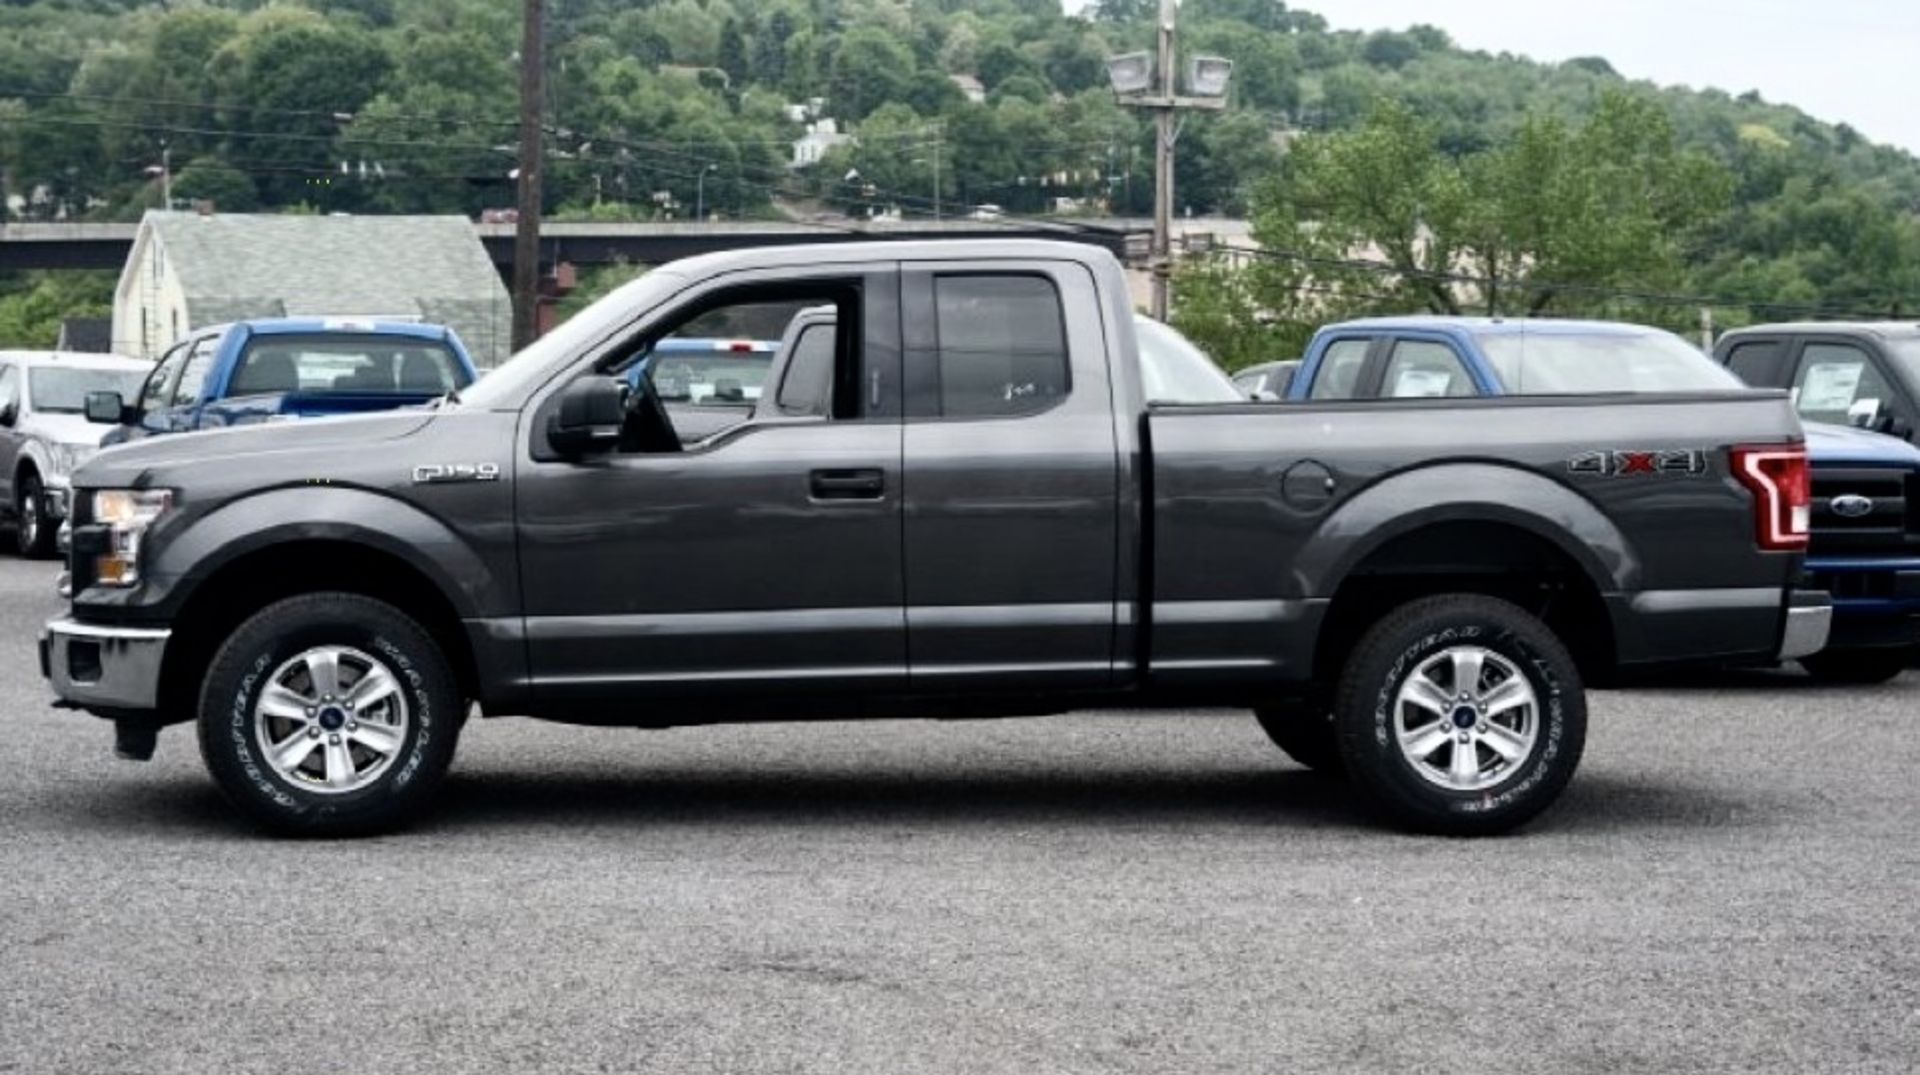 ** ON SALE ** Ford F-150 2.7L V6 SuperCab XLT '2015 Year' - Automatic - A/C - LHD - ULEZ Compliant - Image 2 of 10